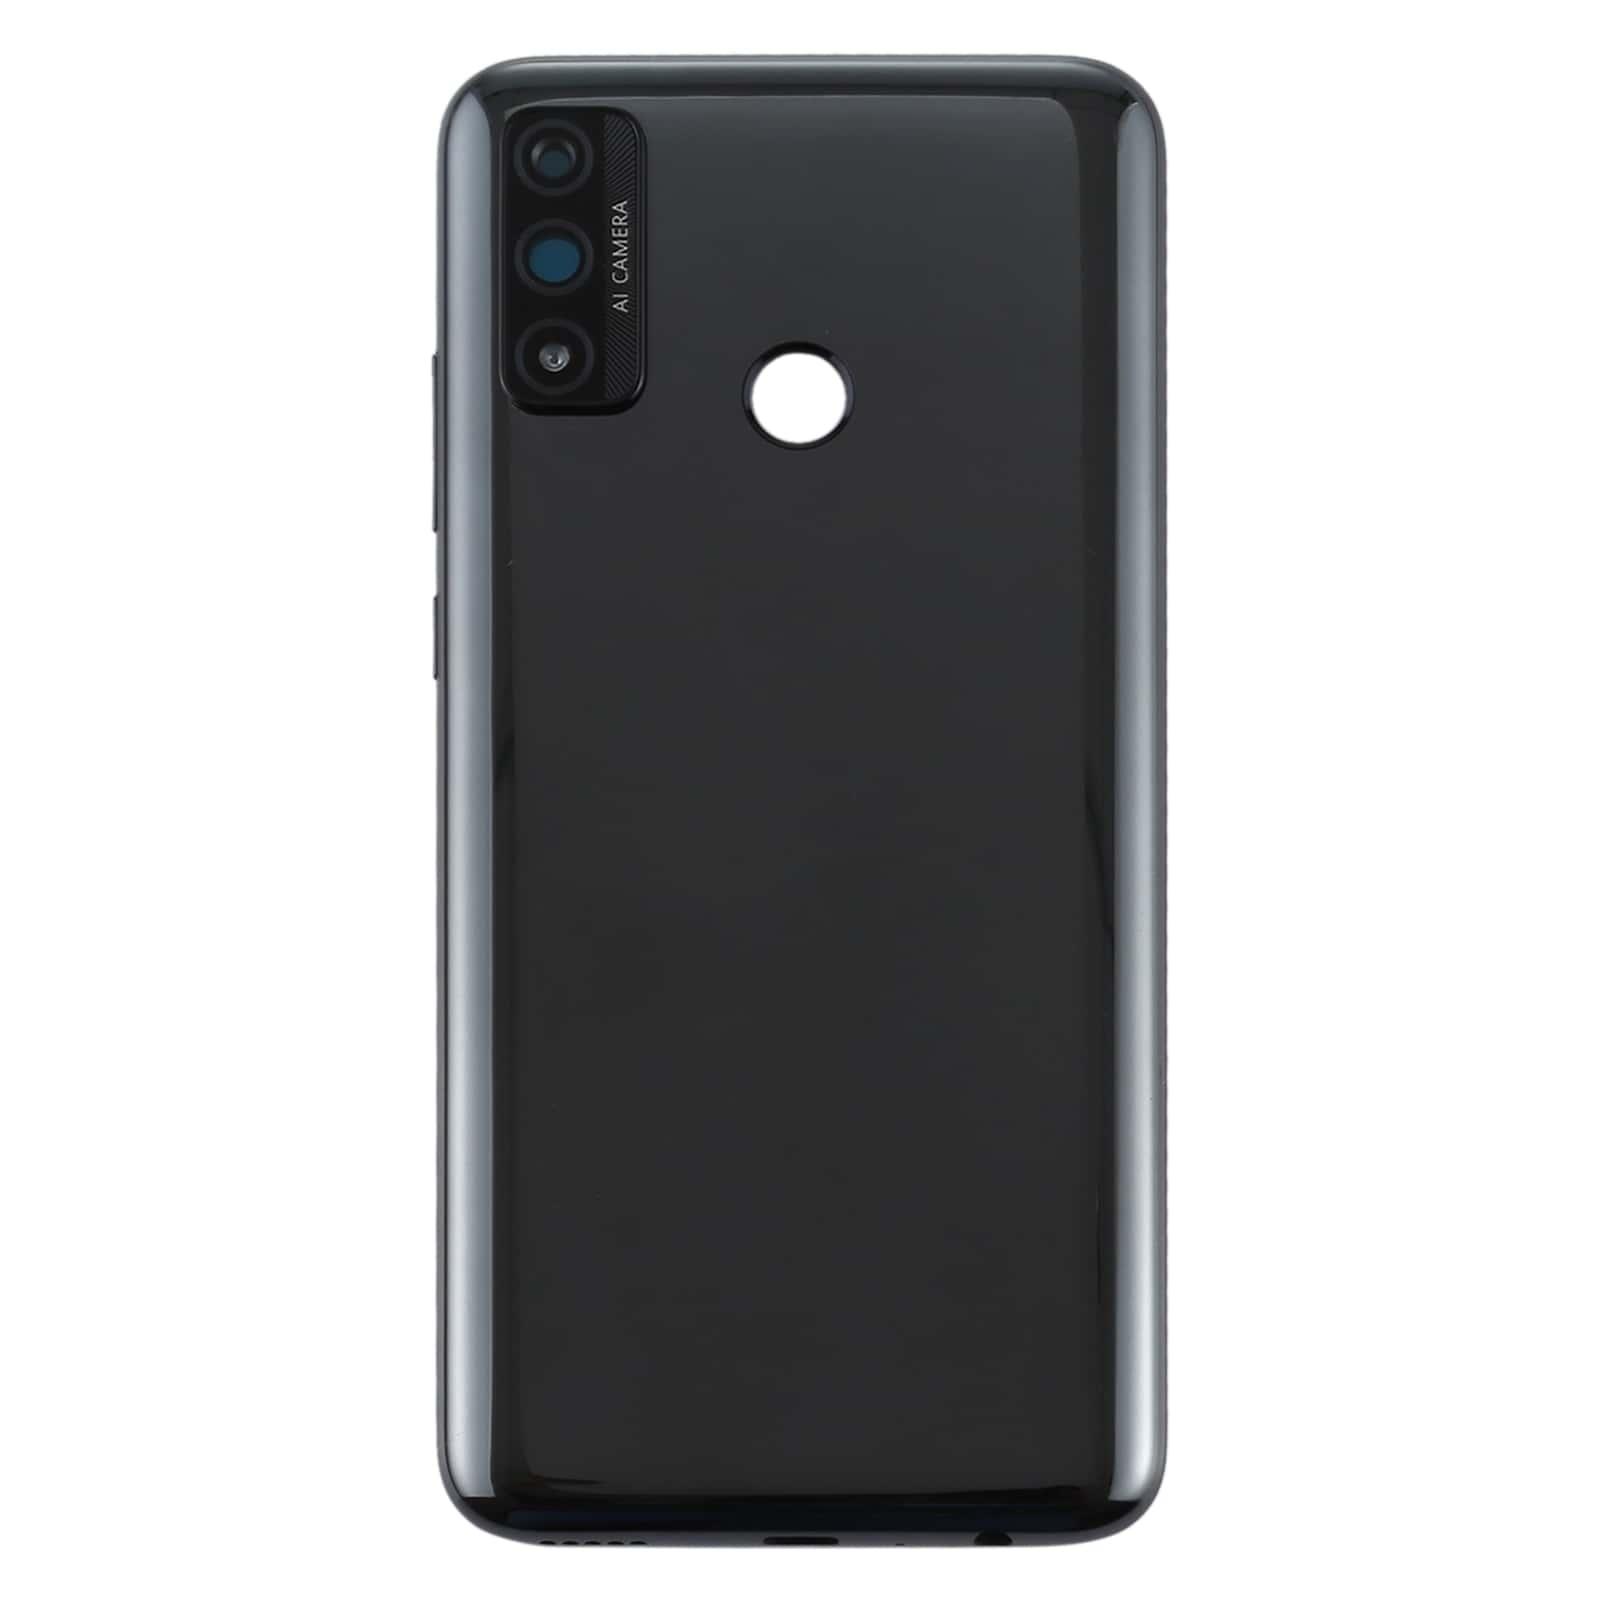 Back Panel Housing Body for Huawei P smart 2020 Black with Camera Lens